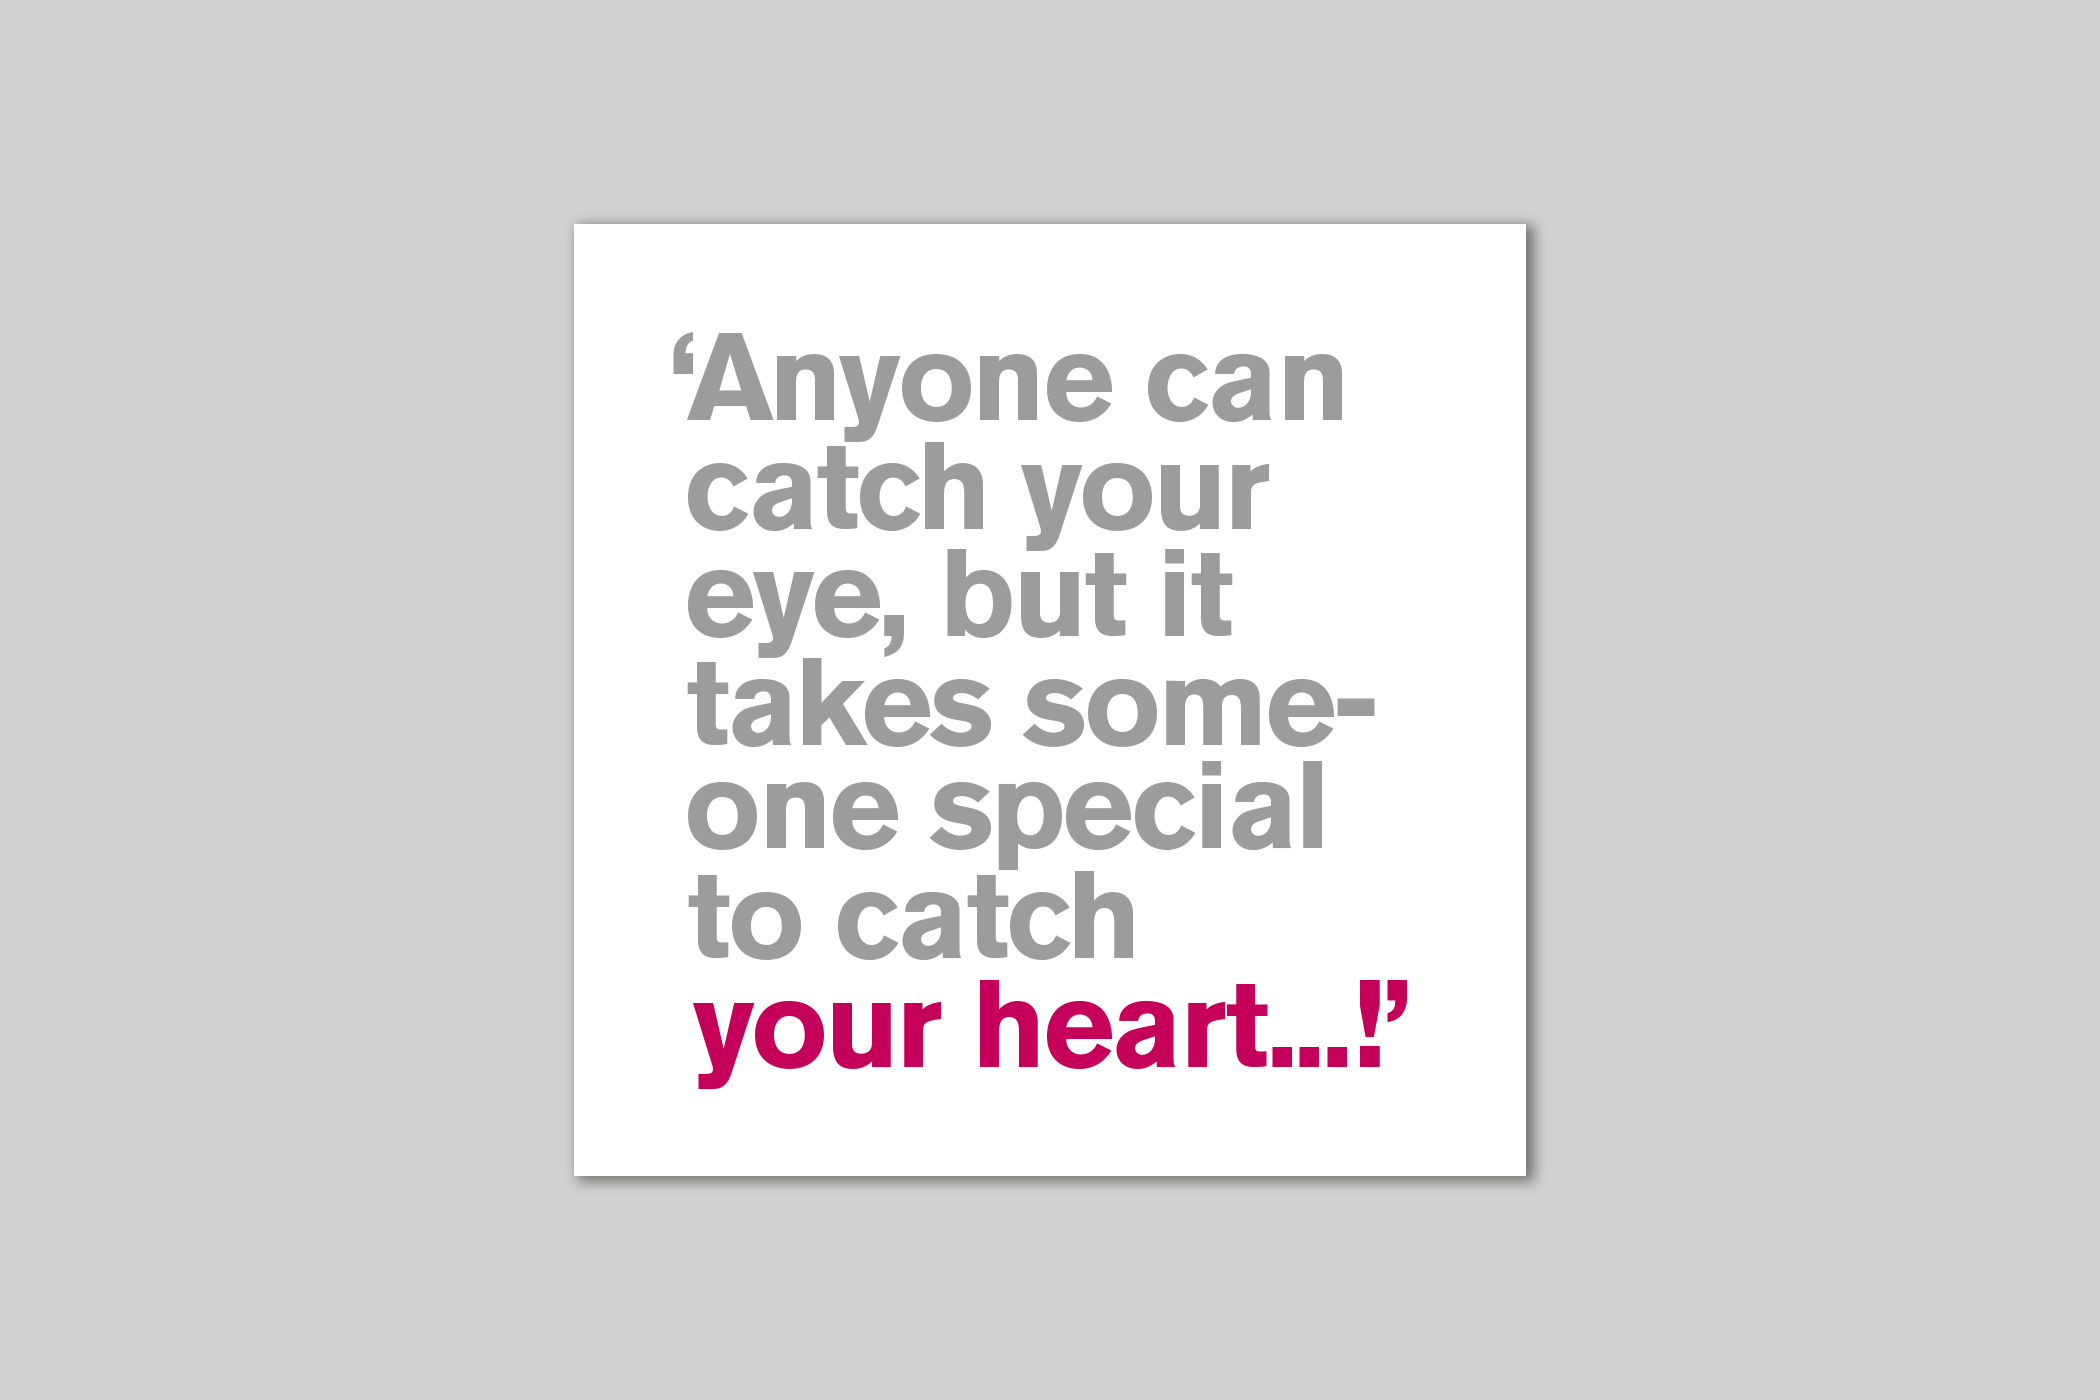 Catch Your Heart rngagement card from Lyric range of quotation cards by Icon.